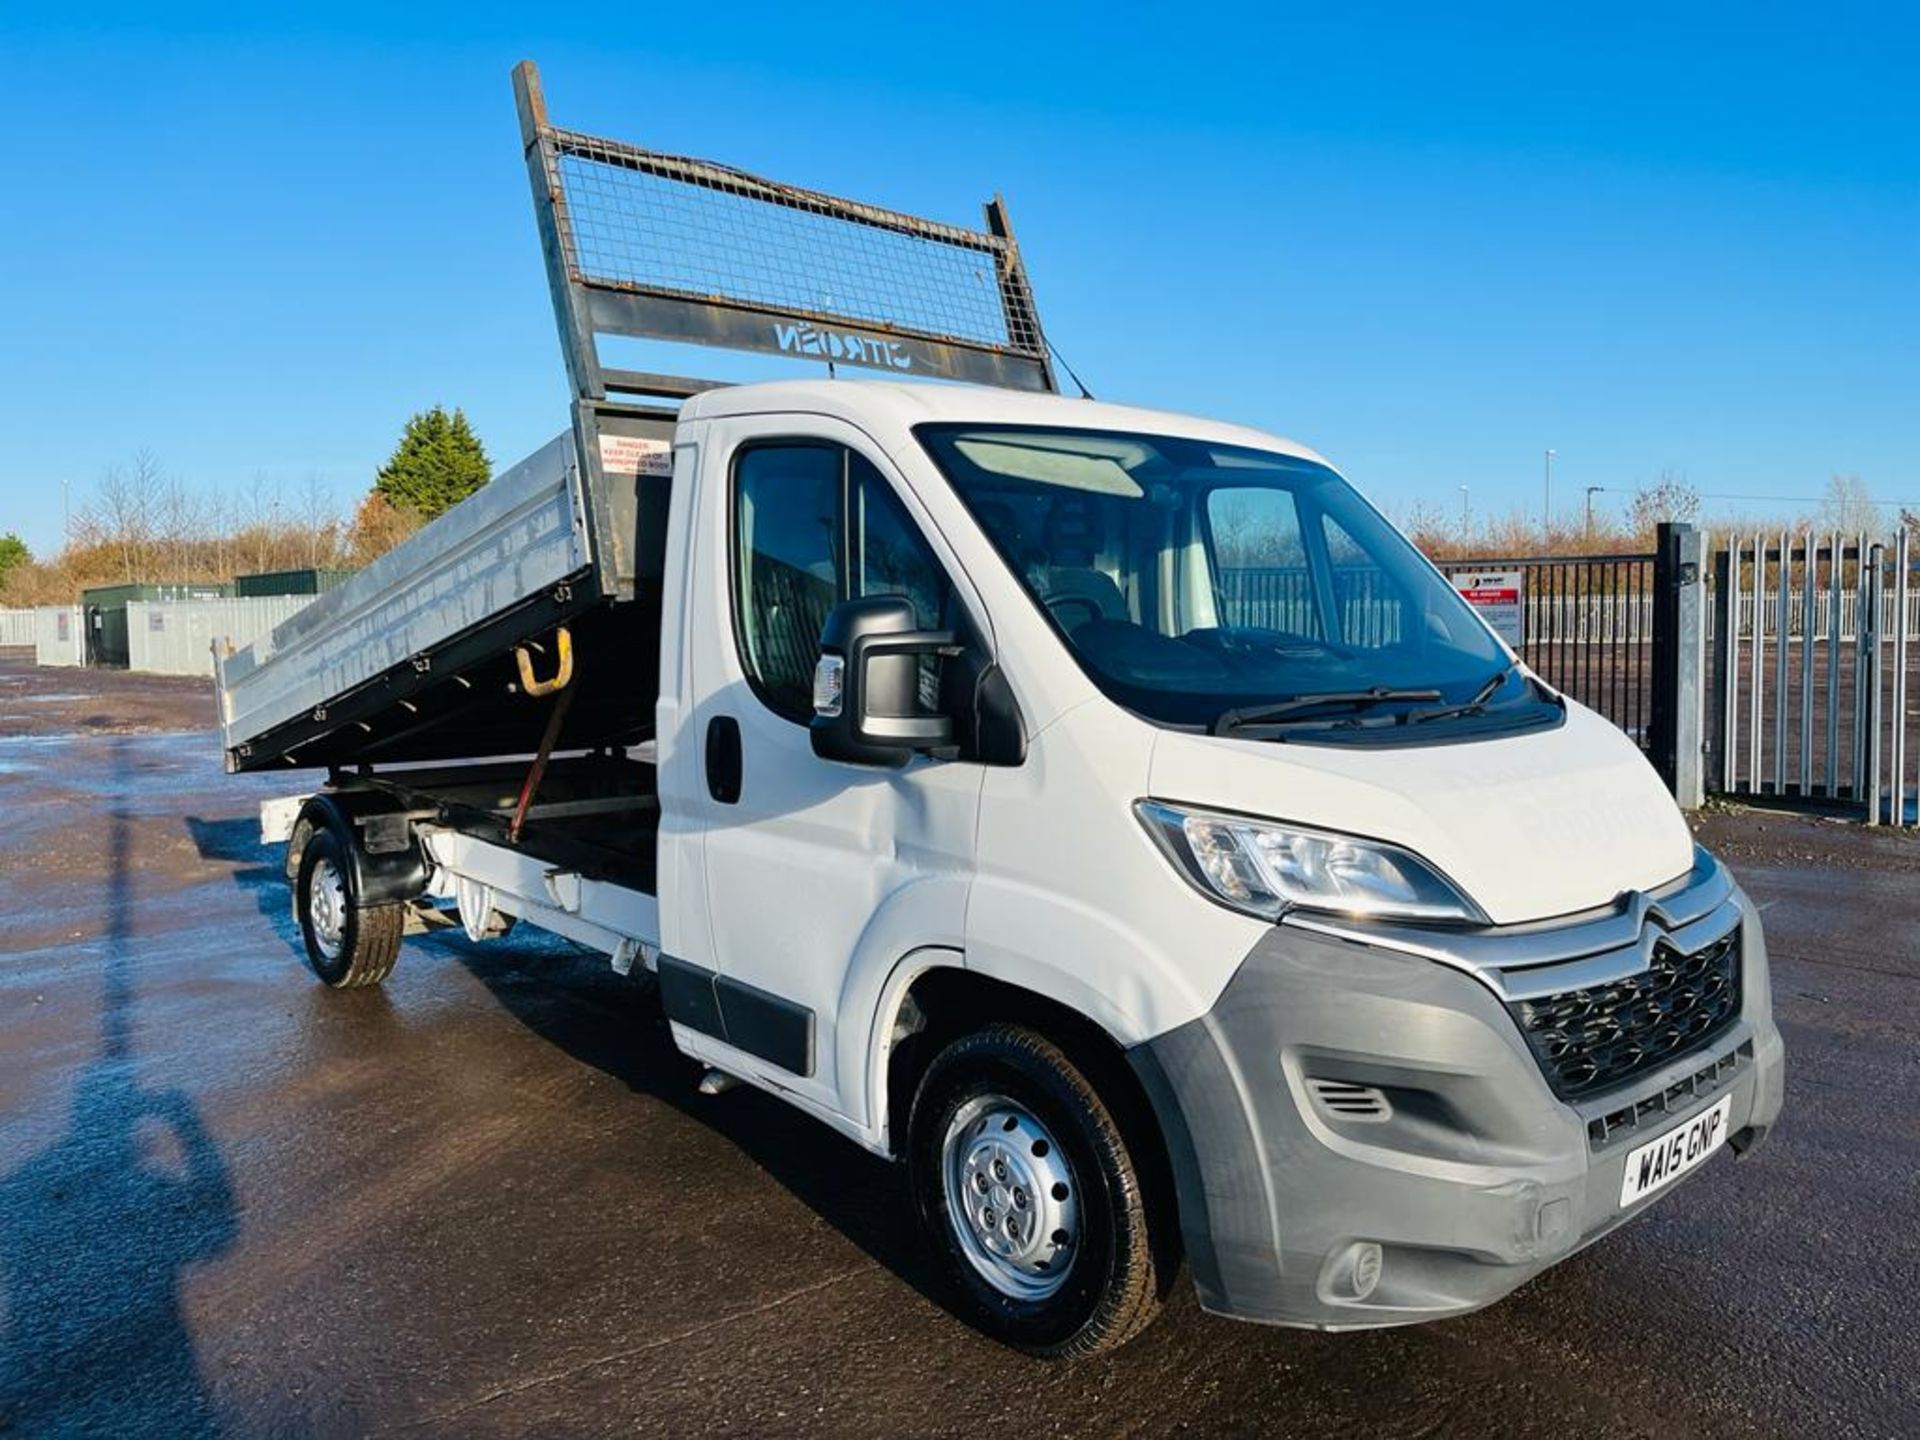 ** ON SALE ** Citroen Relay 35 2.2 HDI 130 LWB Alloy Tipper 2015 '15 Reg' Only 105,090 Miles